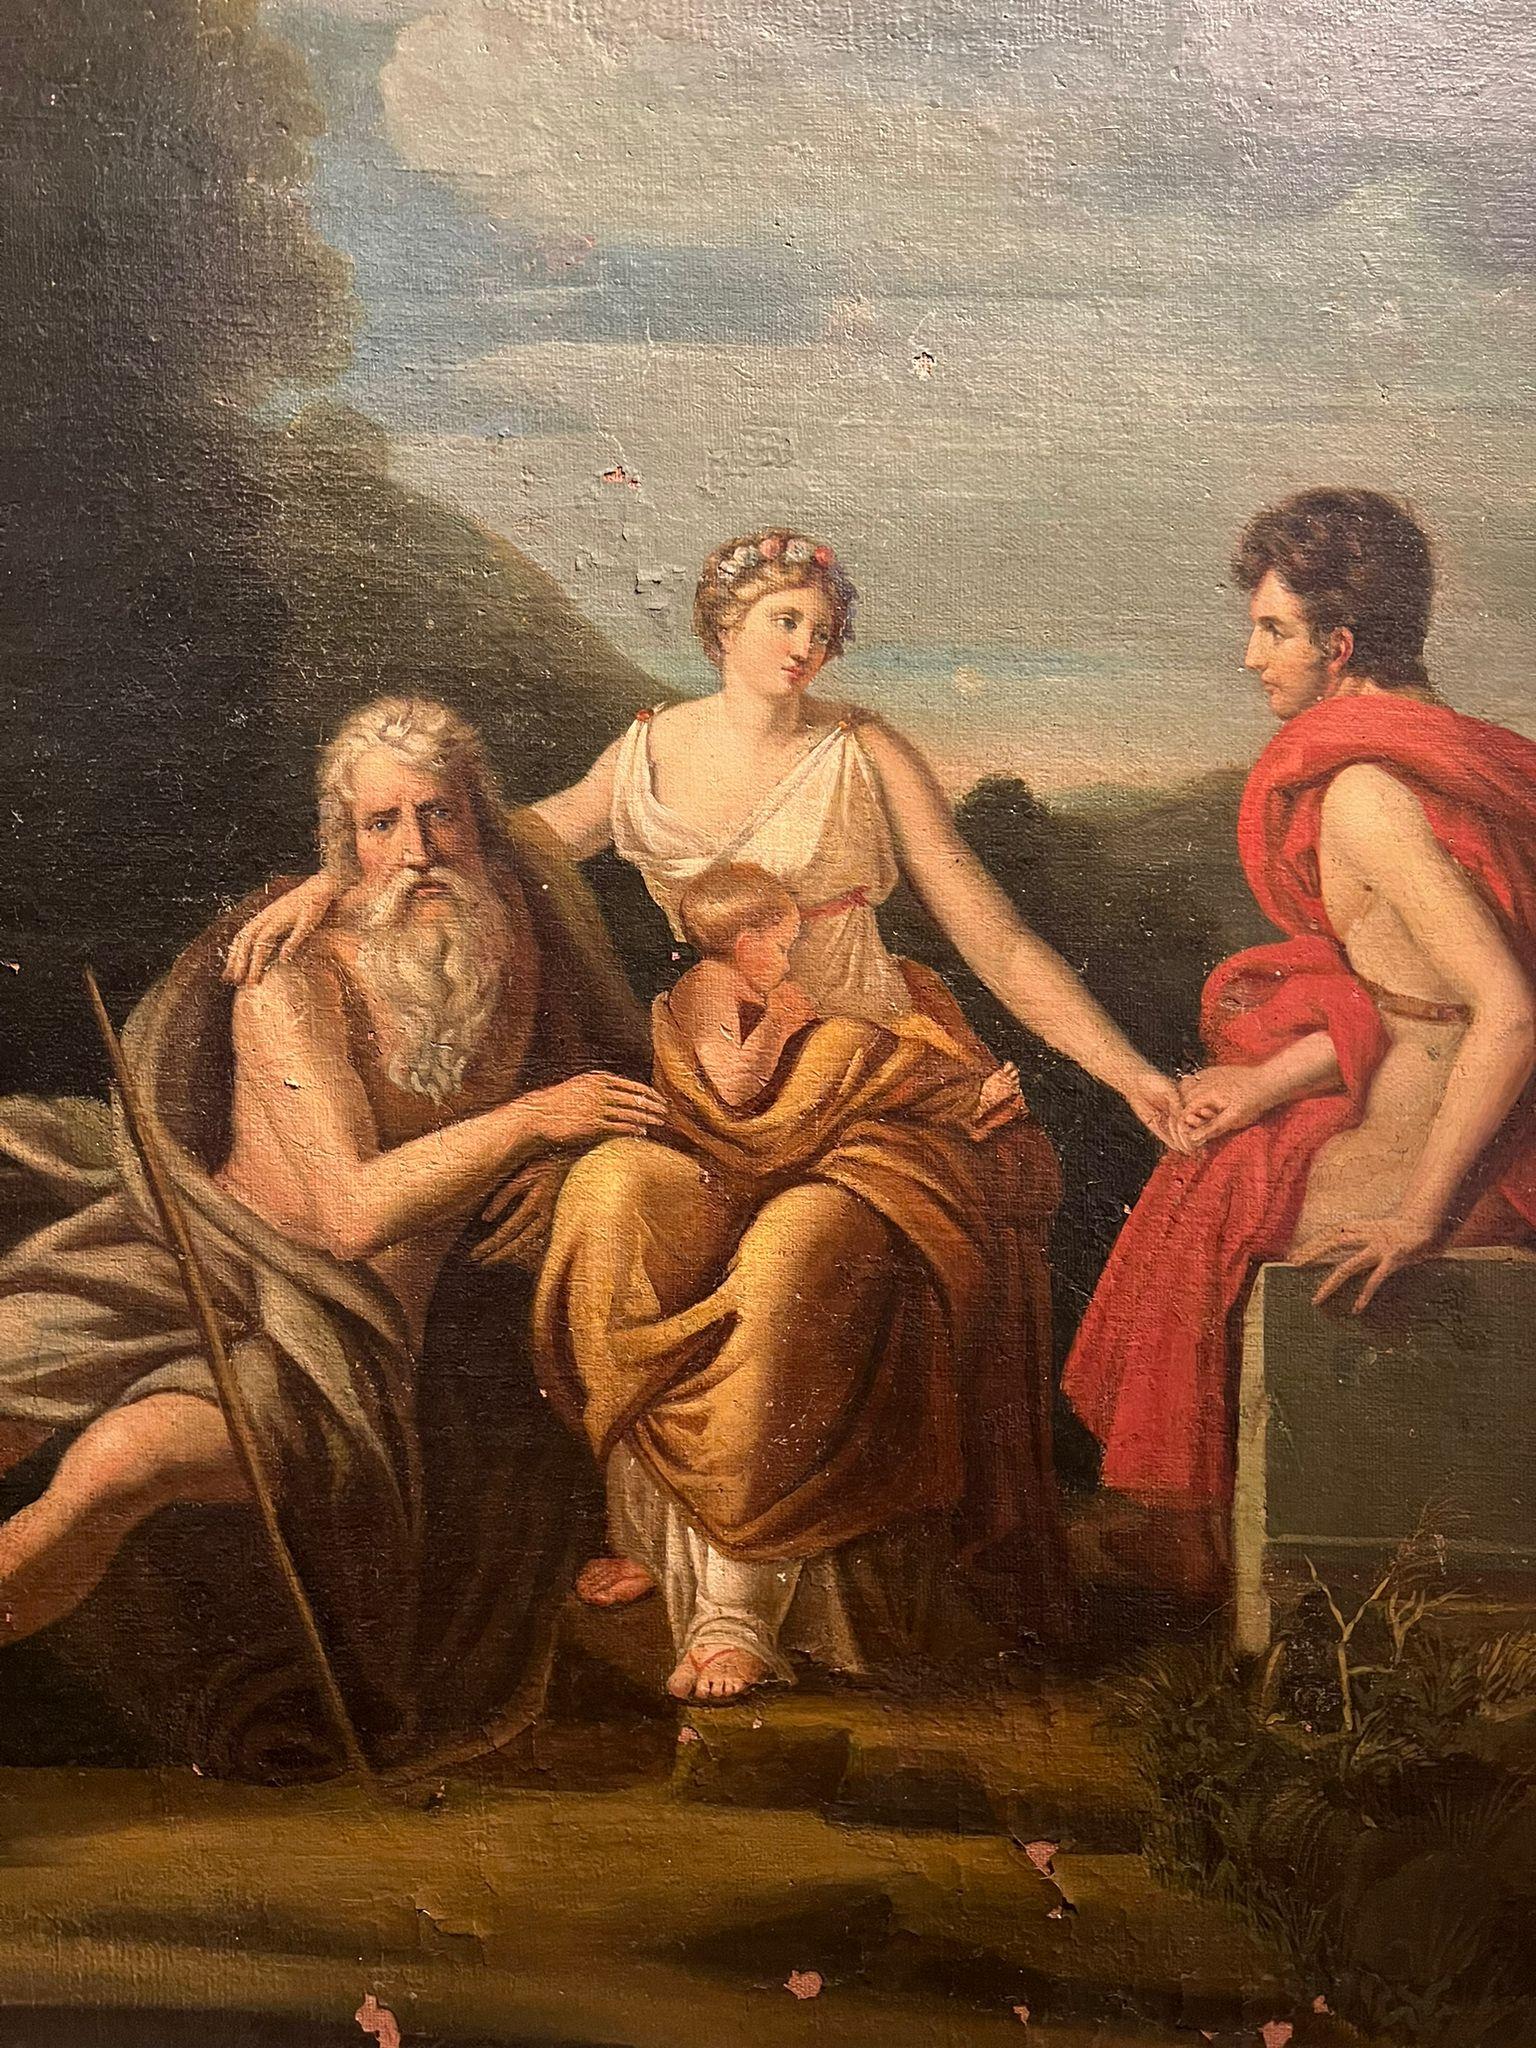 French school of the early 19th century. 

Beautiful oil on canvas painting depicting the three stages of life according to Francois Gerard.

The allegorical painting depicts a woman (Life) holding hands with 3 men who each represent a stage of